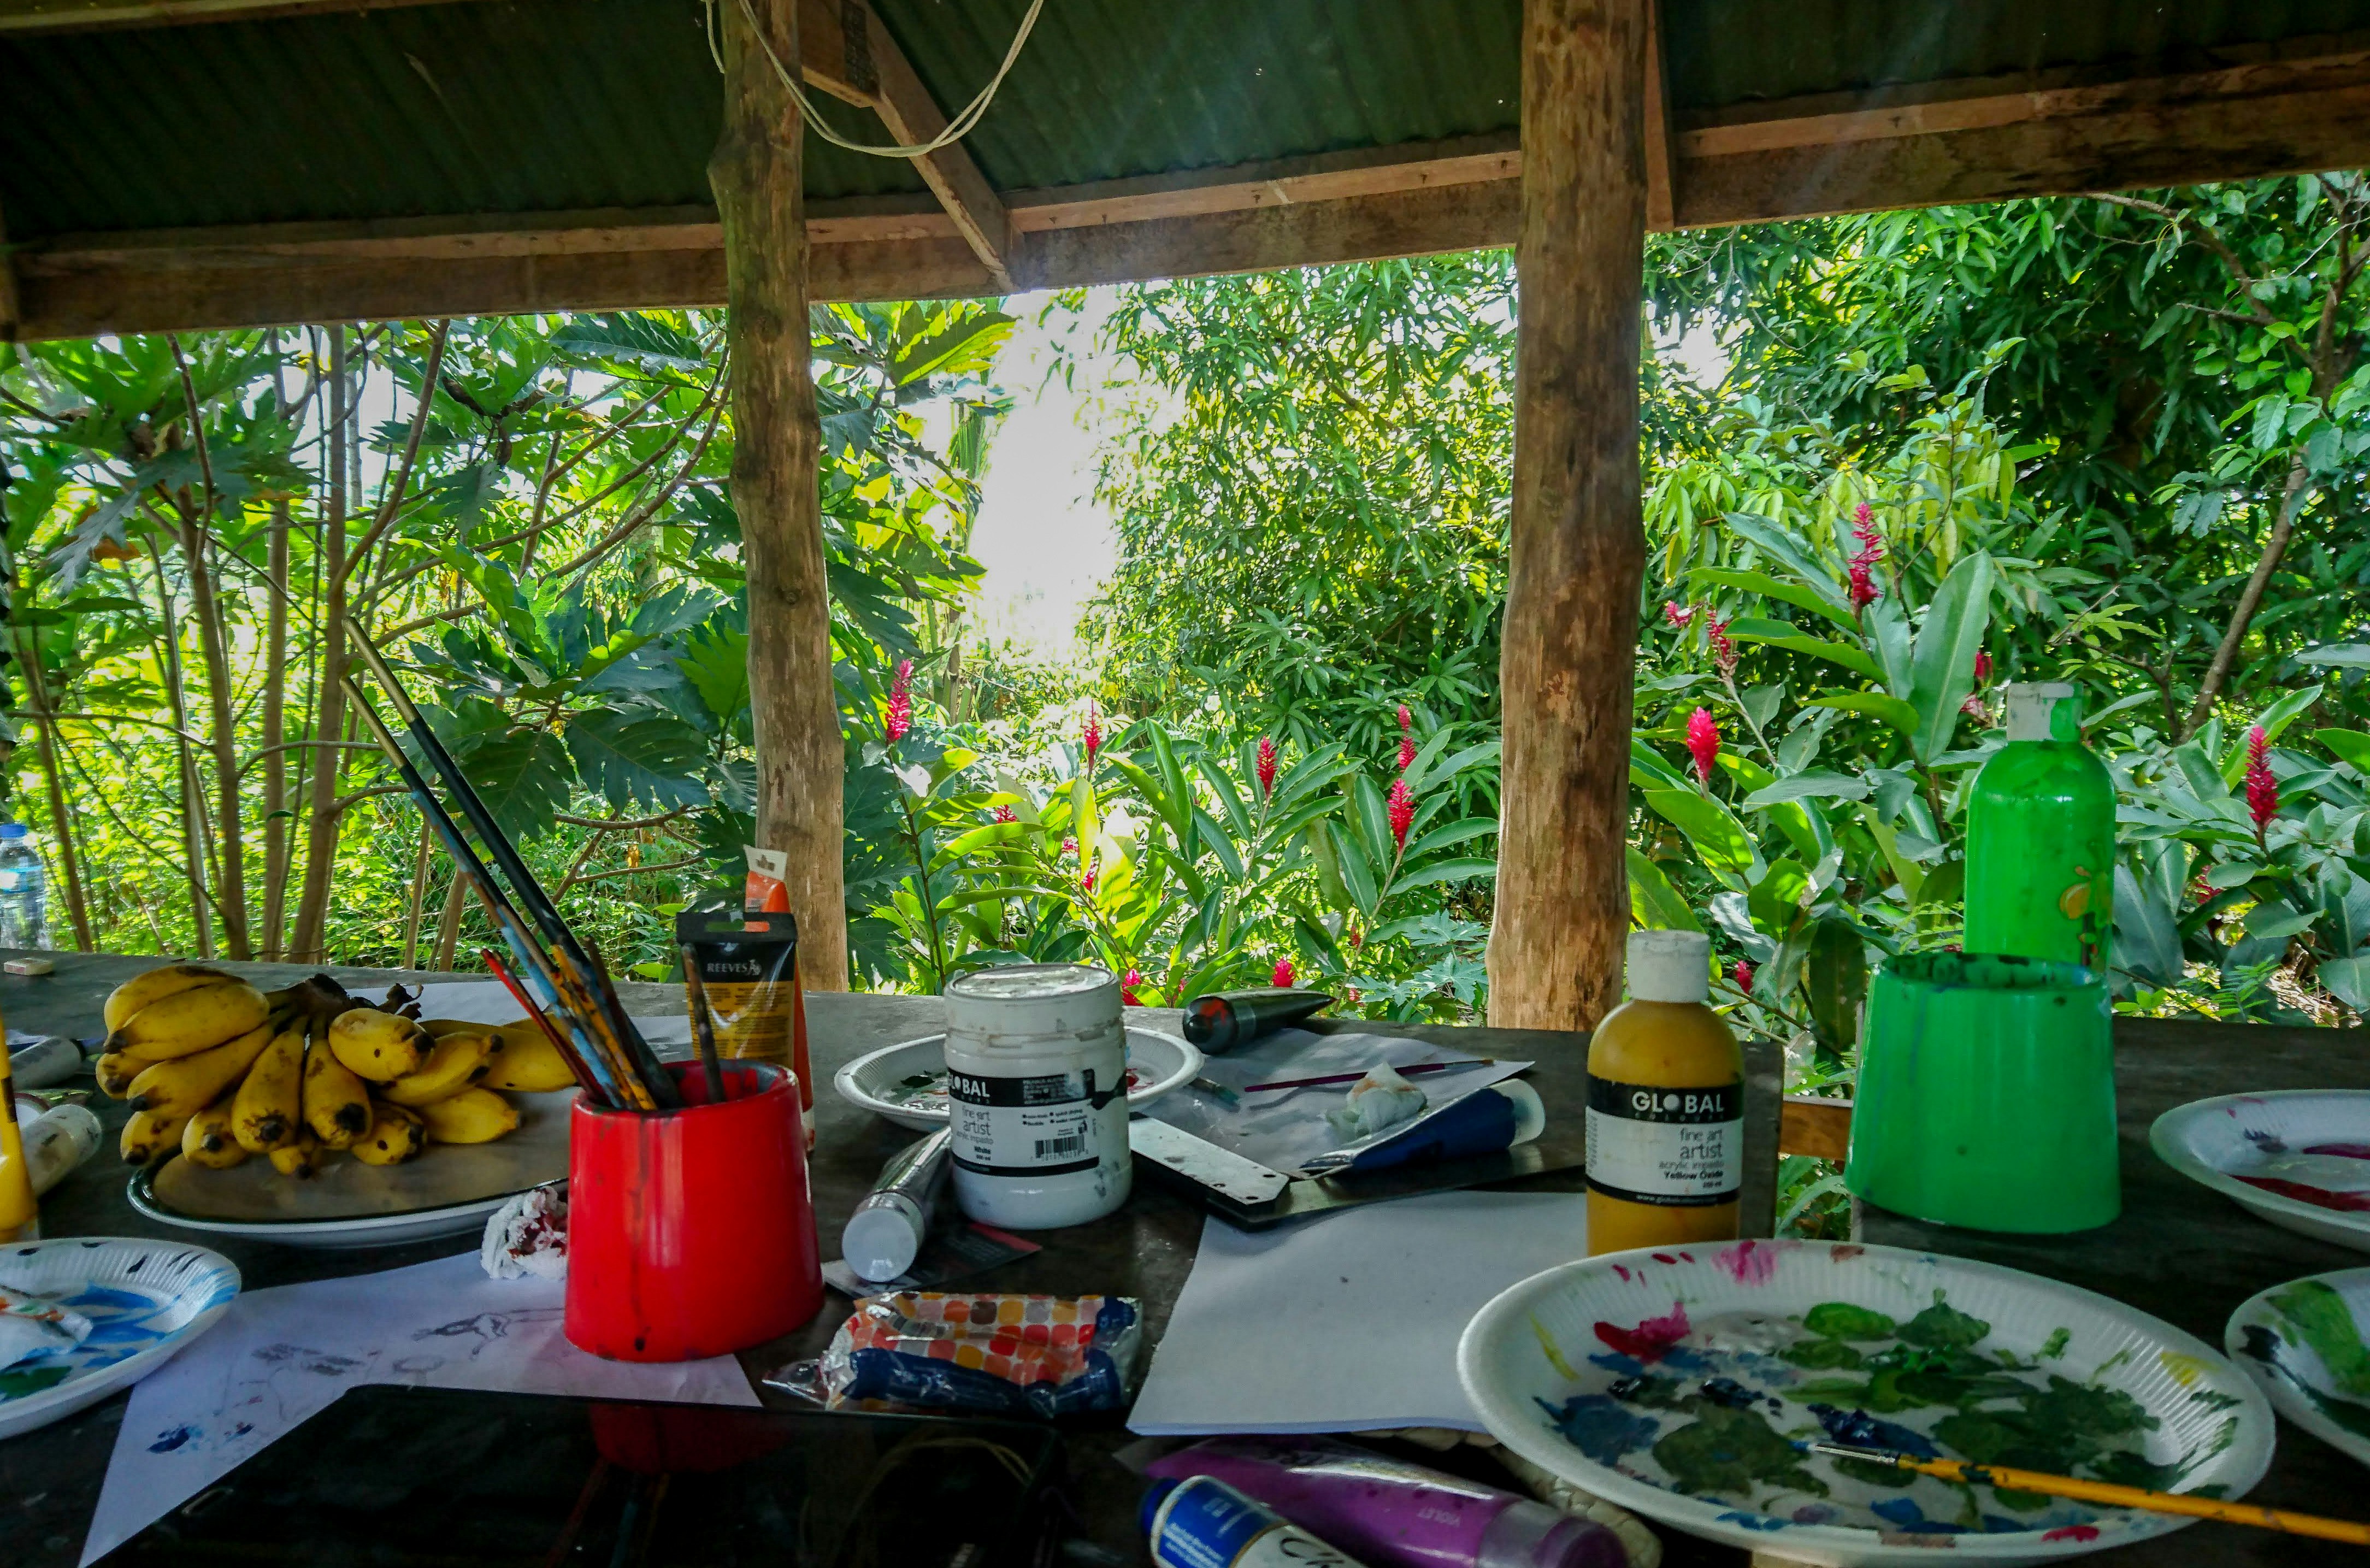 A table laid with paints, palettes and paintbrushes set up outdoors under an awning, surrounded by lush green tropical vegetation.